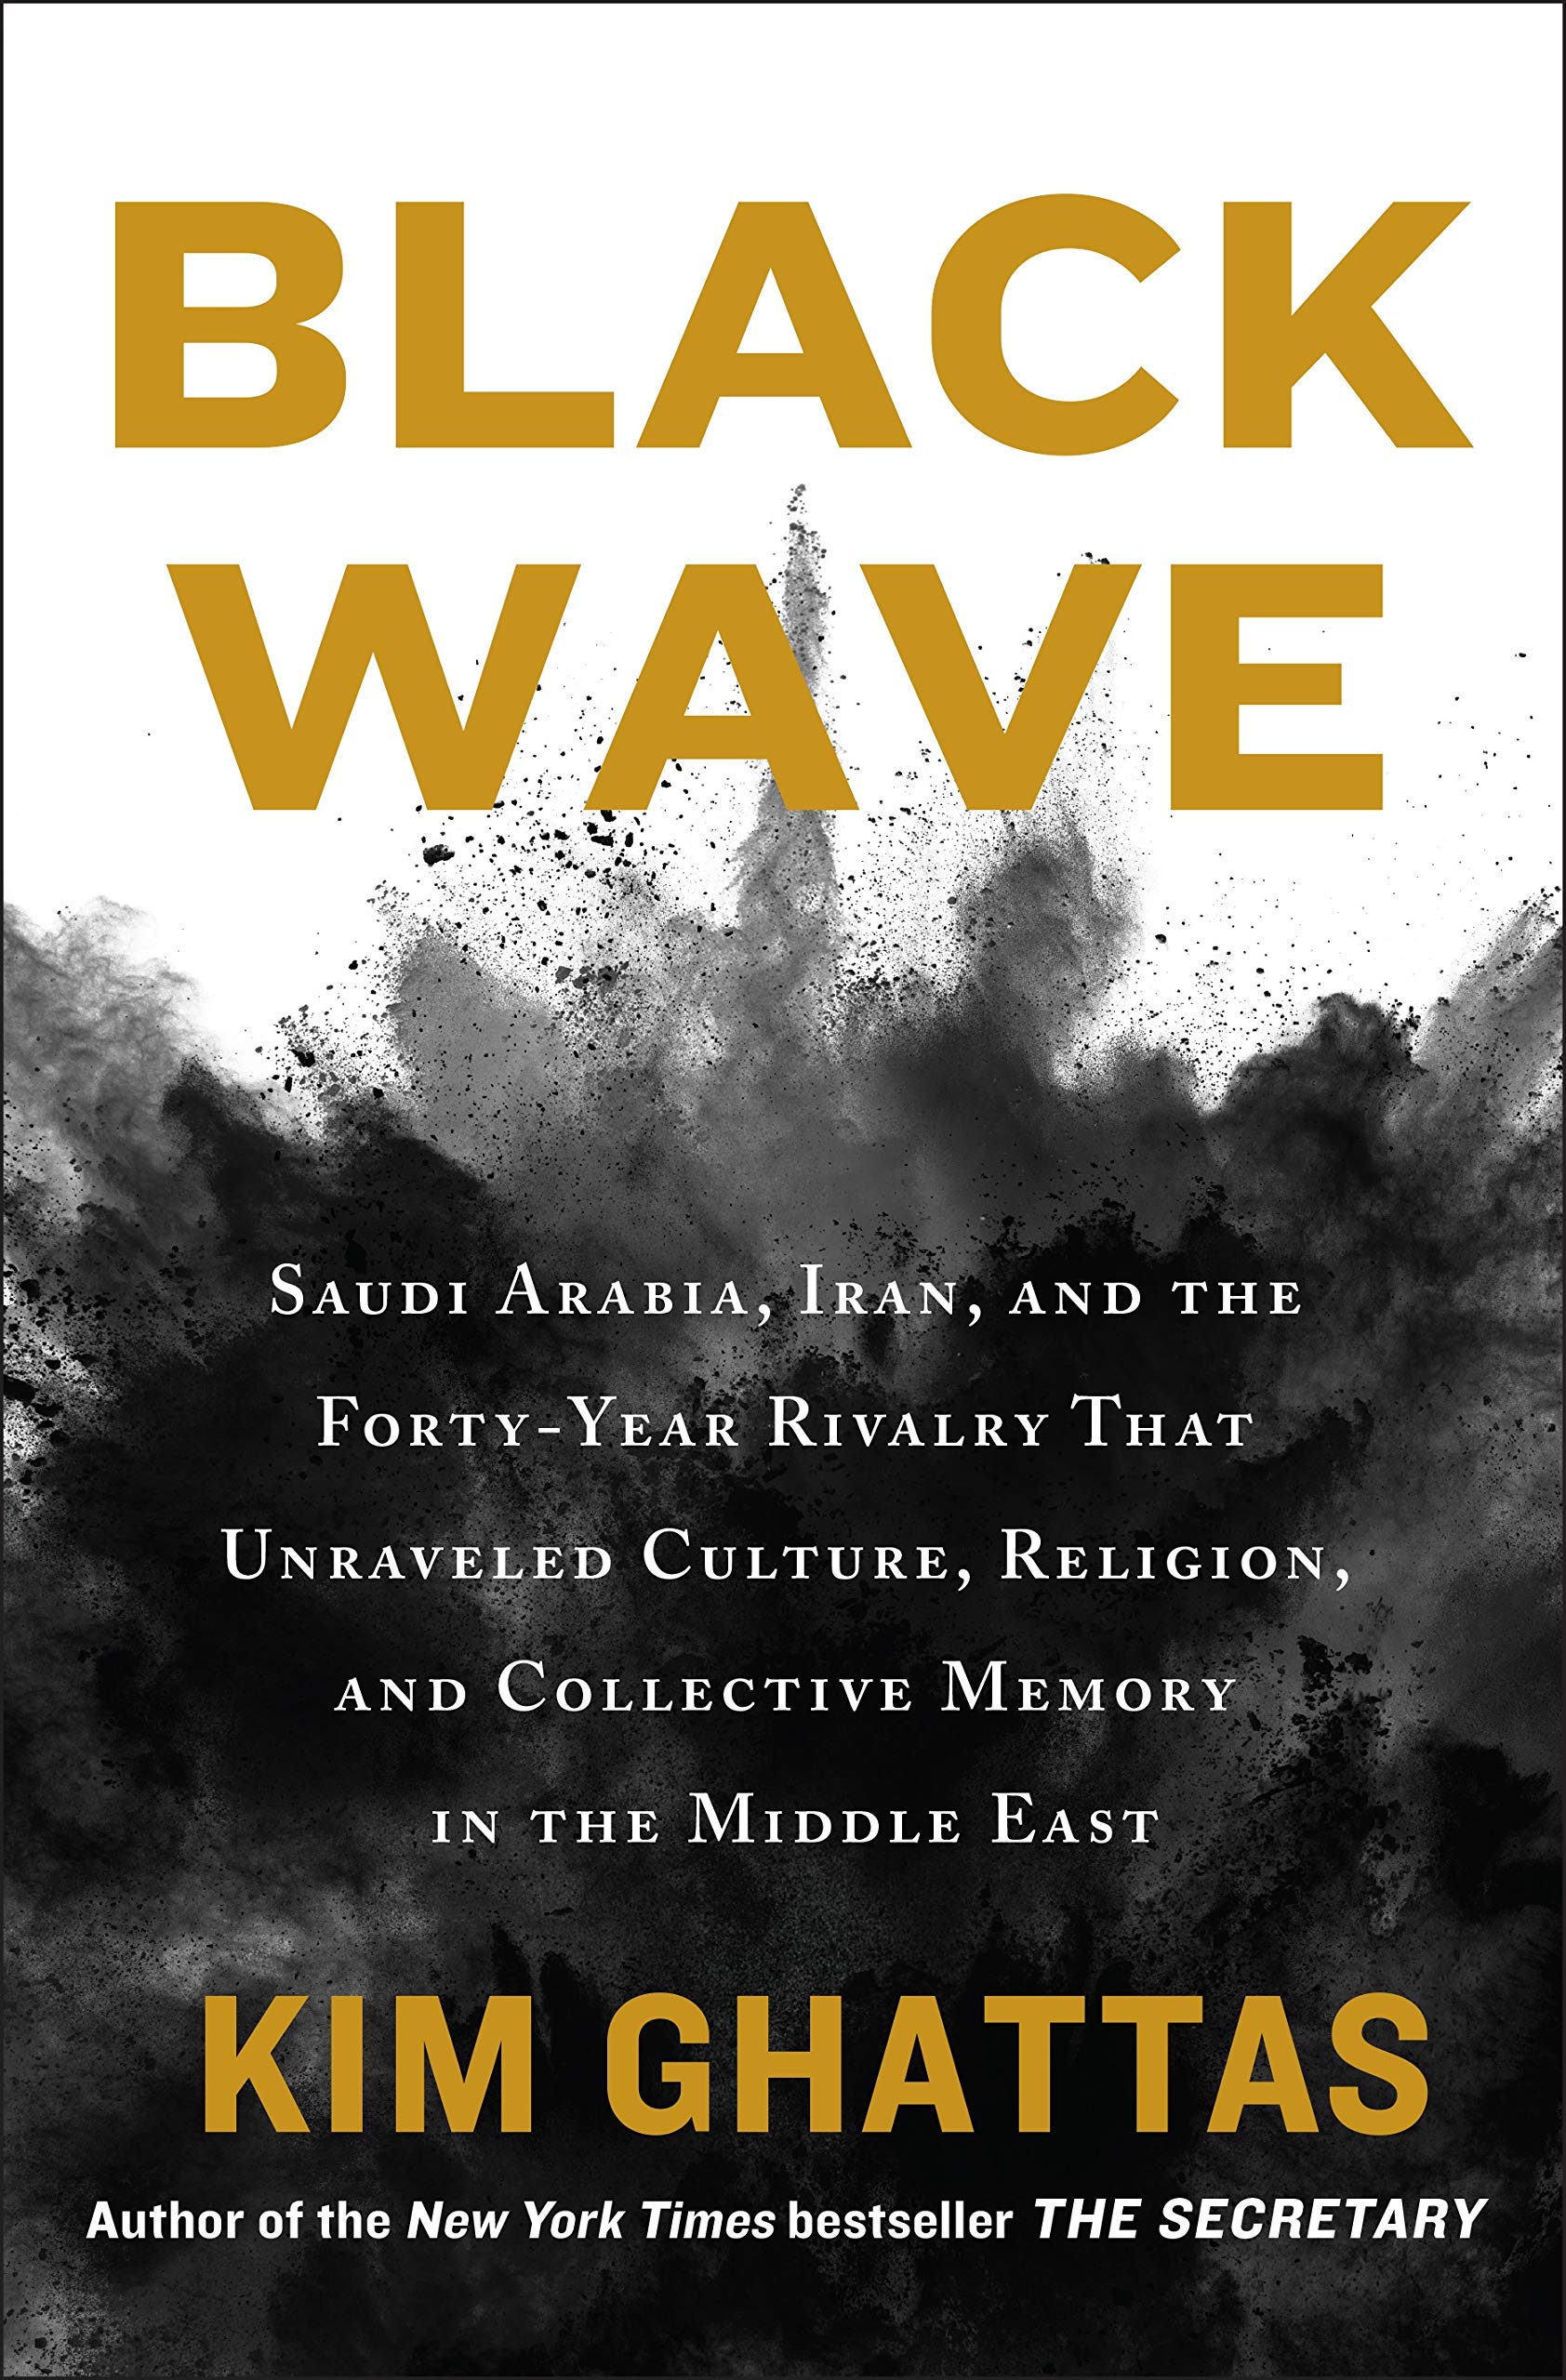  Cover of Kim Ghattas' "Black Wave: Saudi Arabia, Iran, and the Forty-Year Rivalry That Unraveled Culture, Religion, and Collective Memory in the Middle East" (published by Henry Holt &amp; Co.)